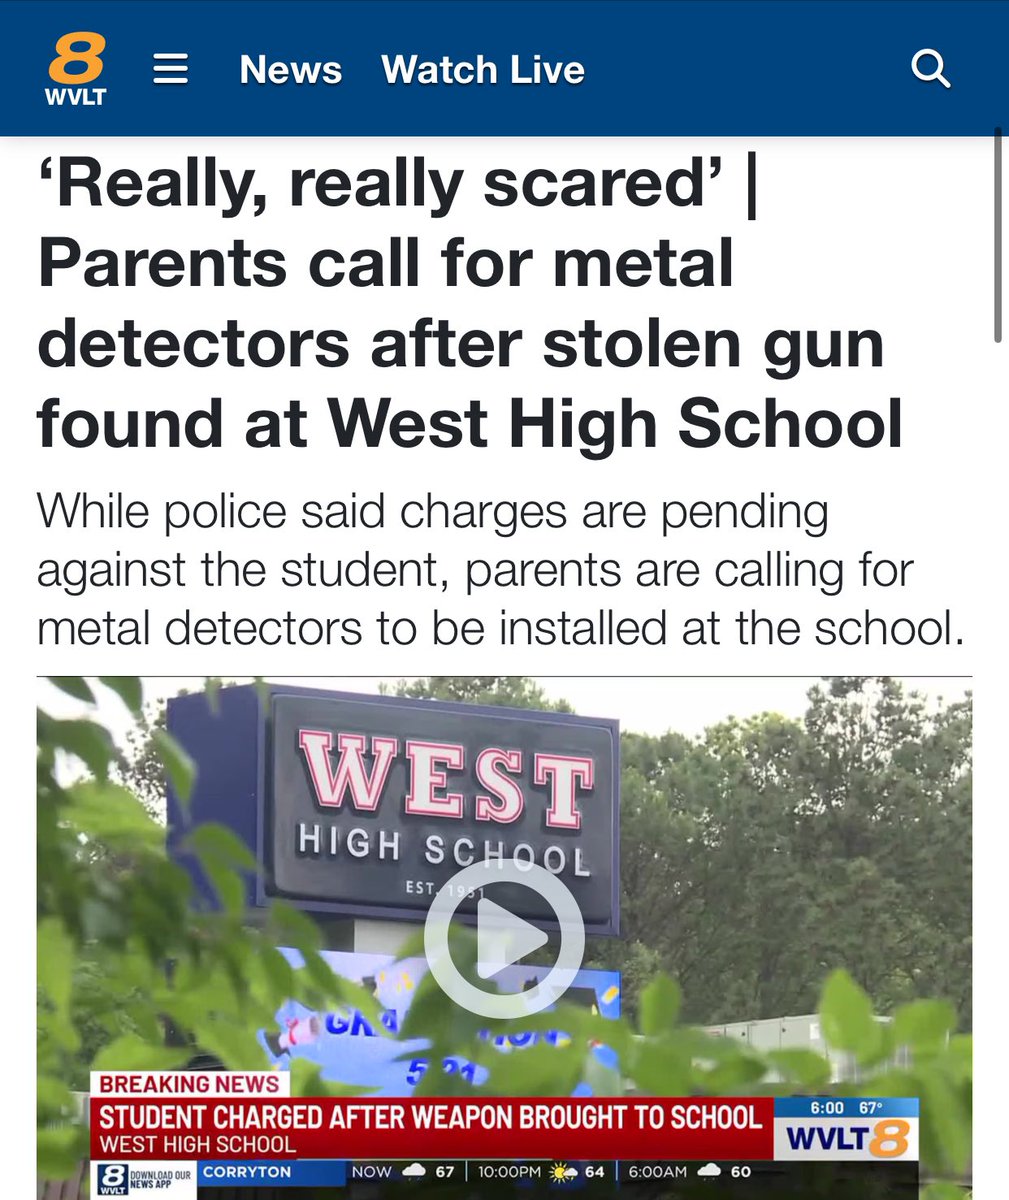 KNOXVILLE: ‘Really, really scared’ | “Parents call for metal detectors after stolen gun found at West High School While police said charges are pending against the student, parents are calling for metal detectors…” wvlt.tv/2024/05/14/rea…